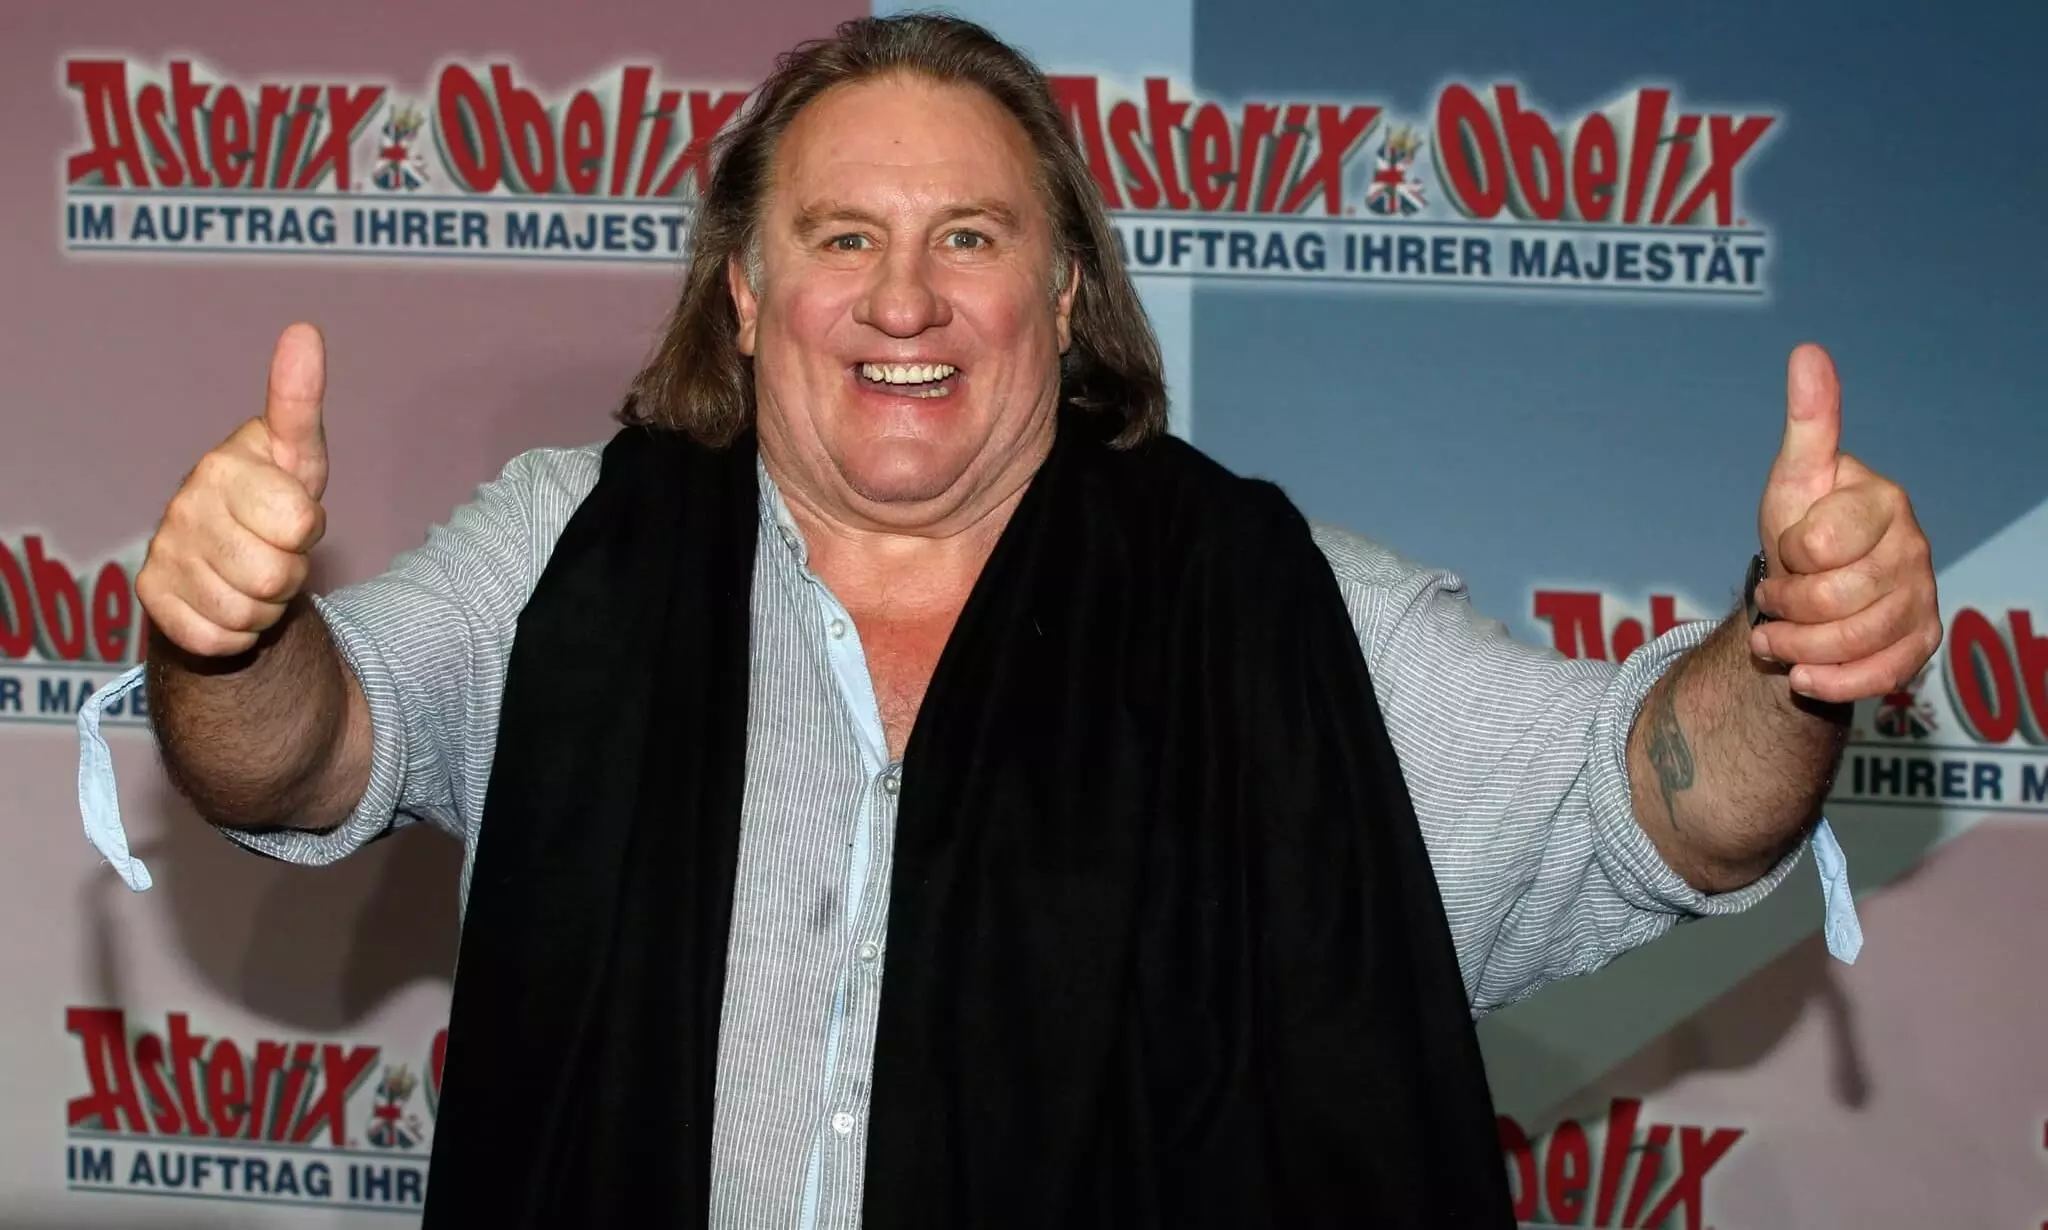 Police summon Gérard Depardieu for questioning about sexual assault allegations